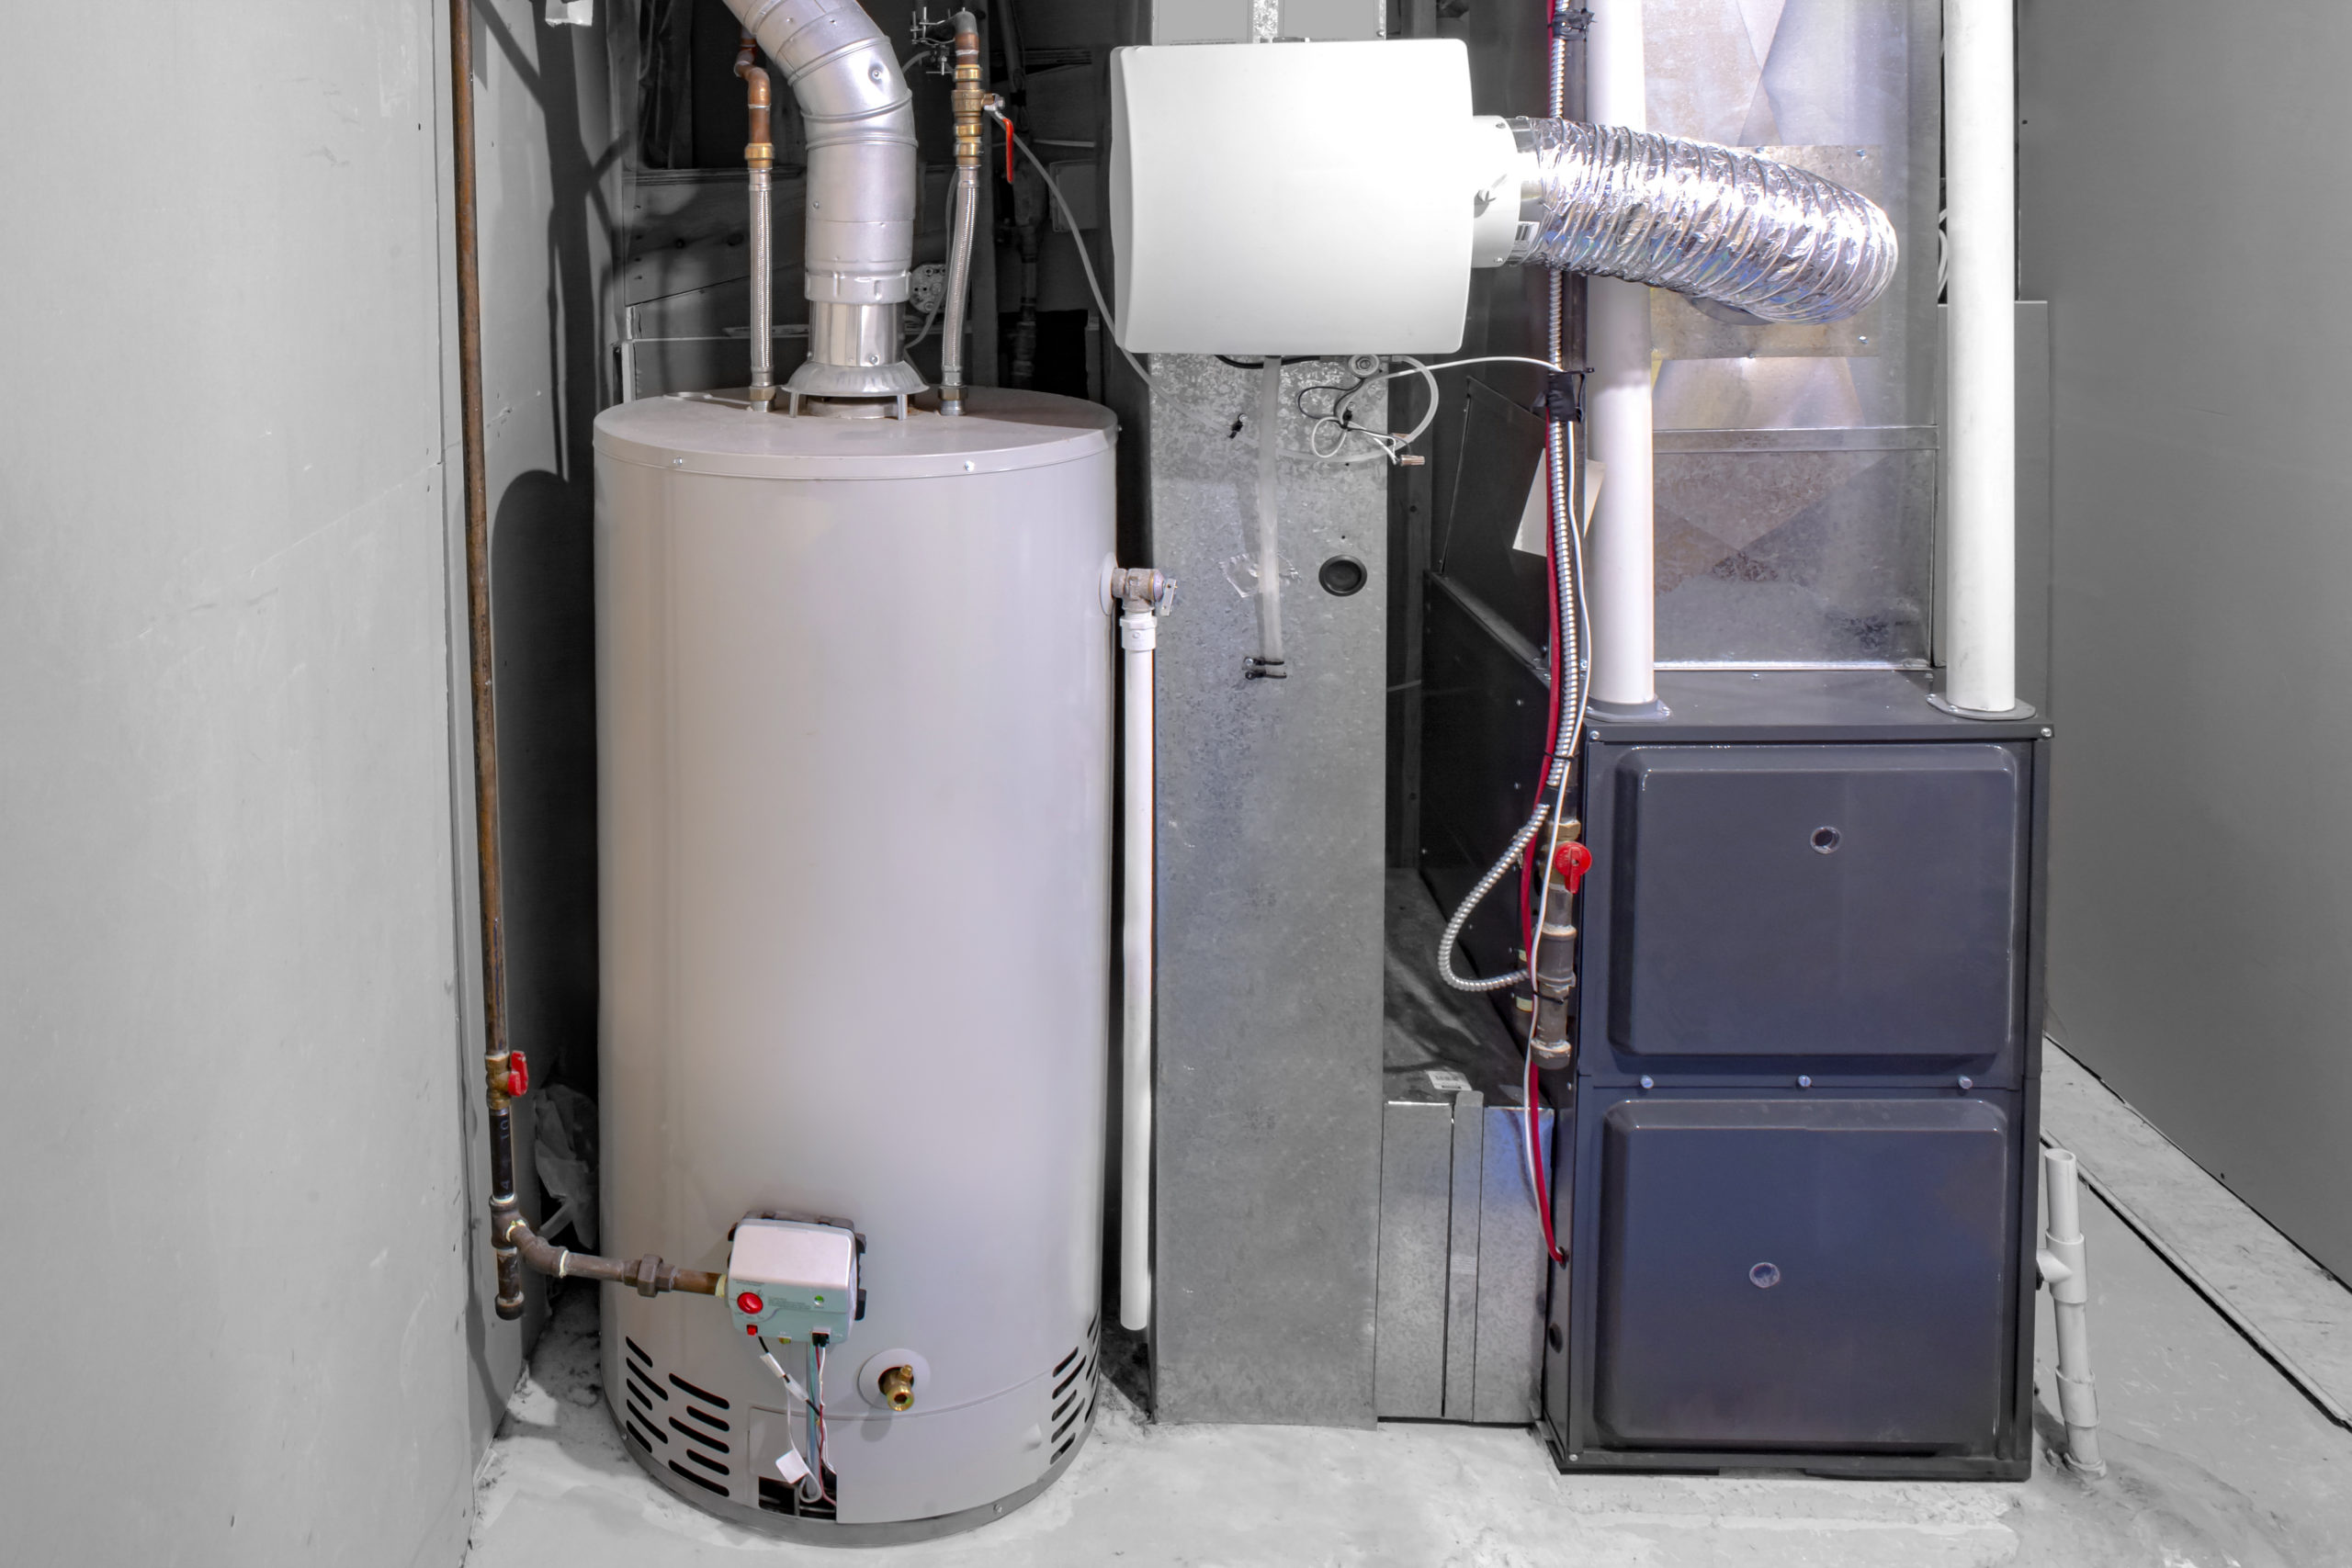 home furnace with a residential gas, water, and heat